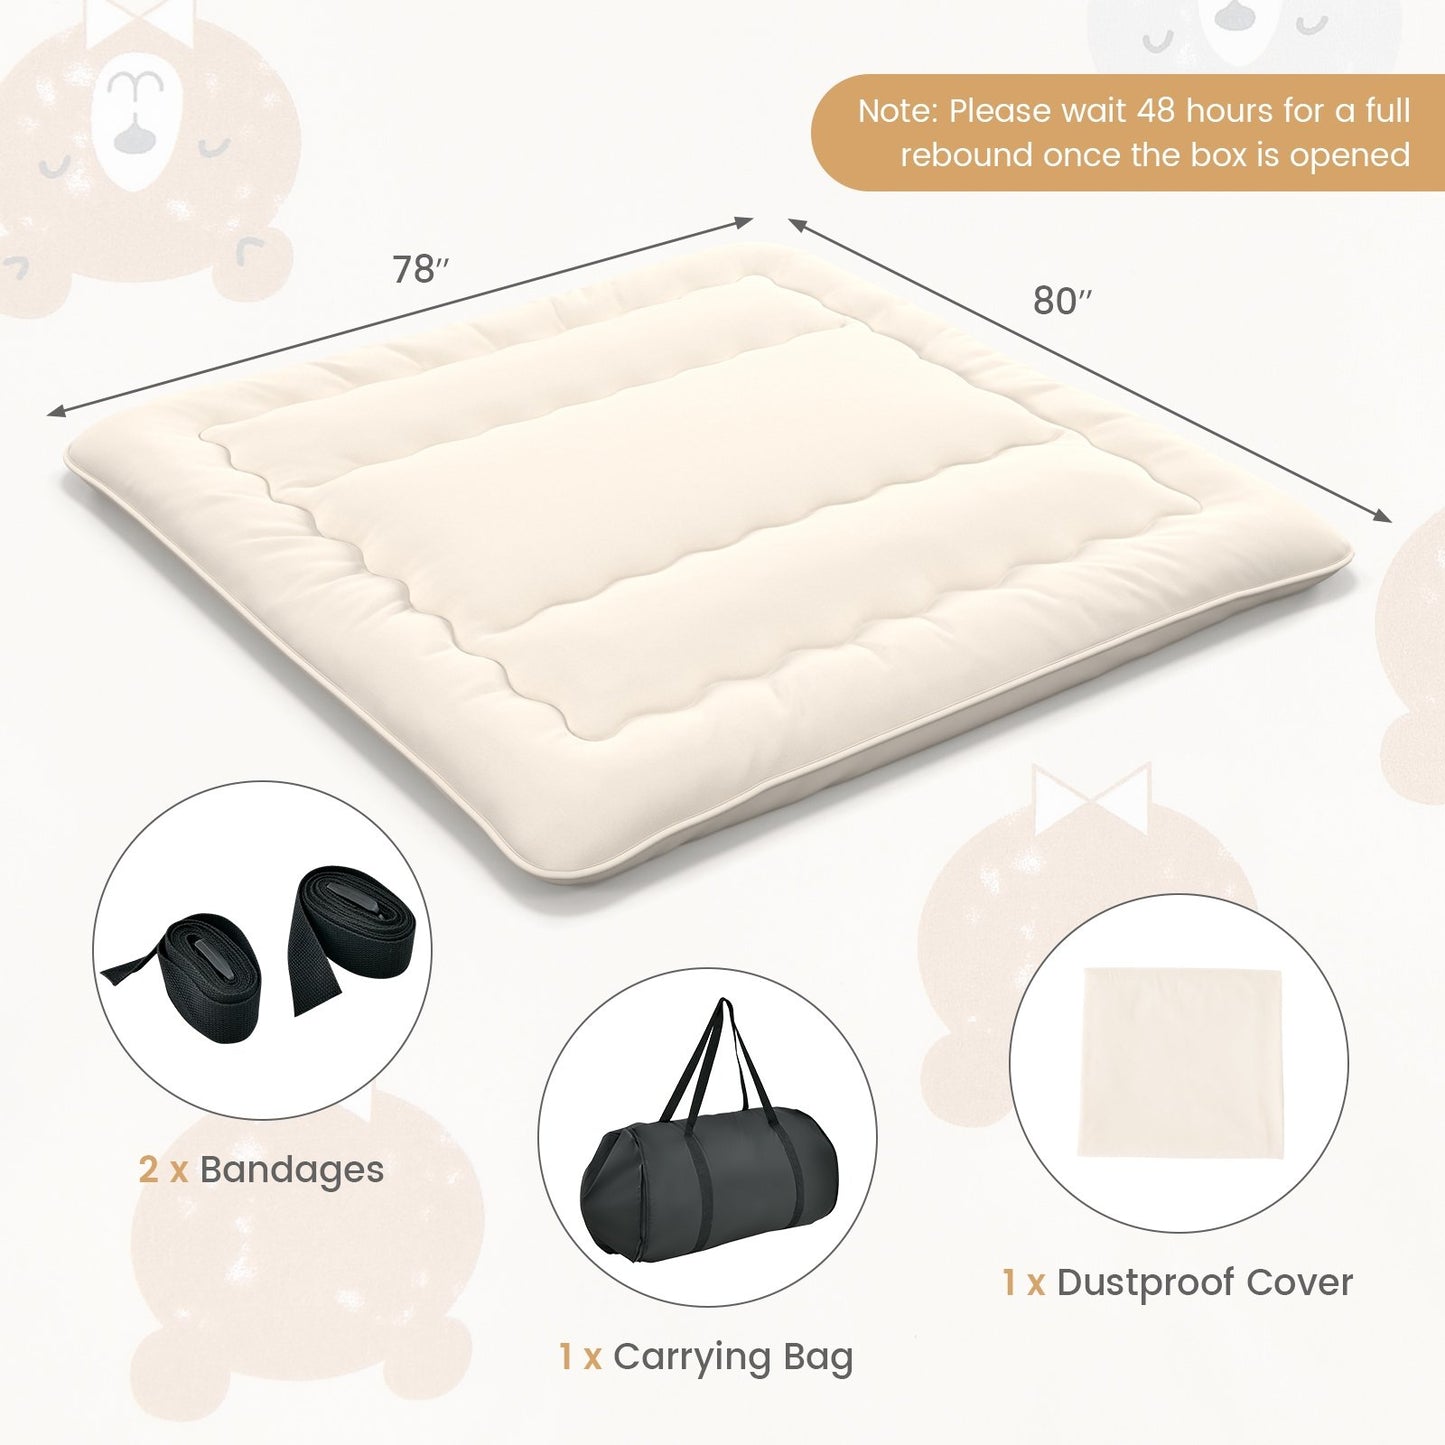 Queen/King/Twin/Full Futon Mattress Floor Sleeping Pad with Washable Cover Beige-King Size, Beige